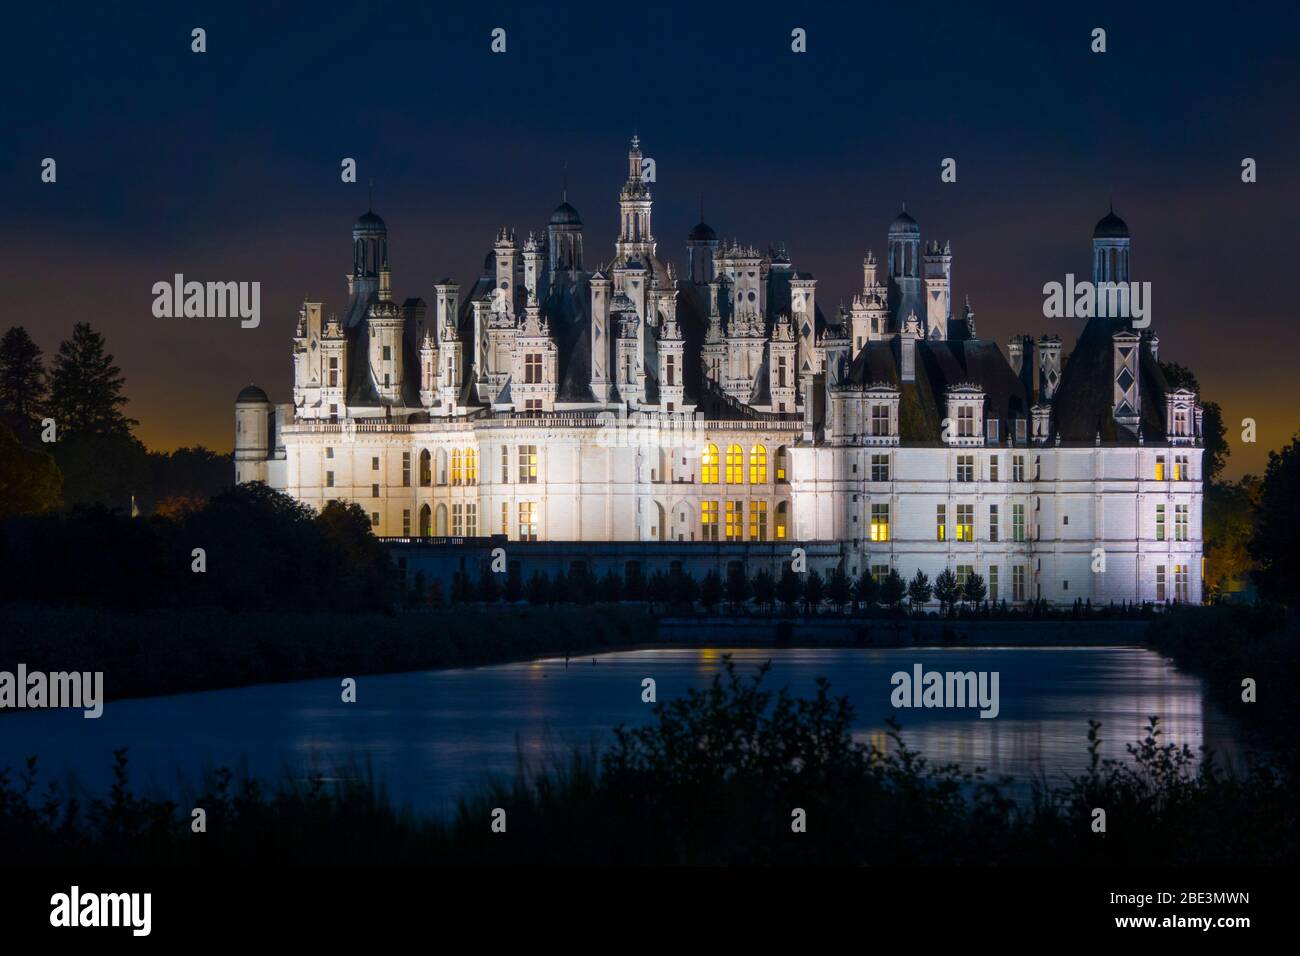 France, Loir-et-Cher (41), Chambord (Unesco World Heritage), royal castle from Renaissance period illuminated by night, viewed from the canal Le Cosso Stock Photo